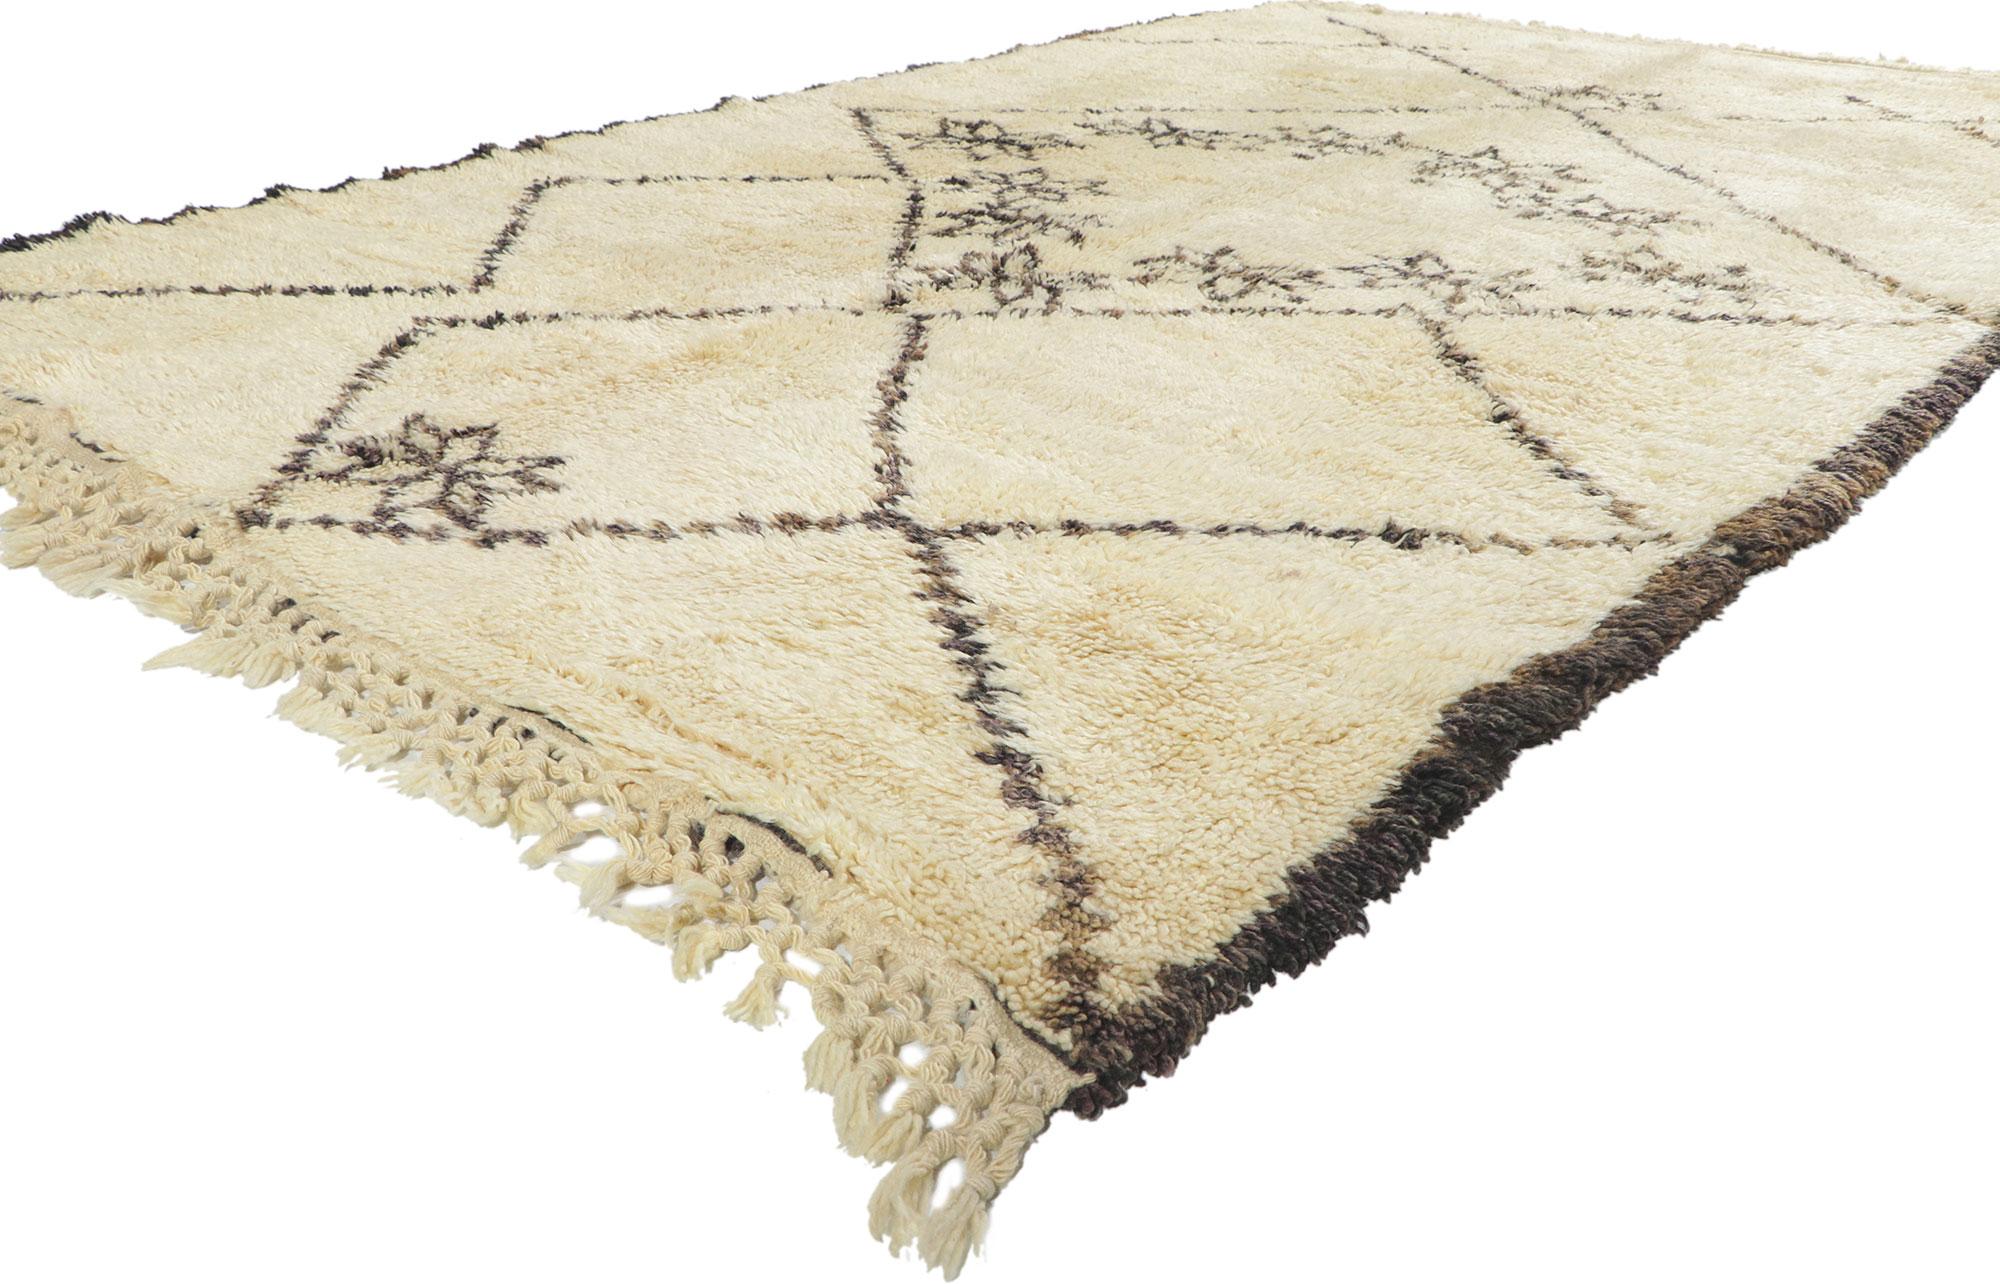 78369 vintage Moroccan Beni Ourain rug, 06'04 x 09'10. With its Midcentury Modern style, incredible detail and texture, this hand knotted wool vintage Beni Ourain Moroccan rug is a captivating vision of woven beauty. The eye-catching diamond trellis